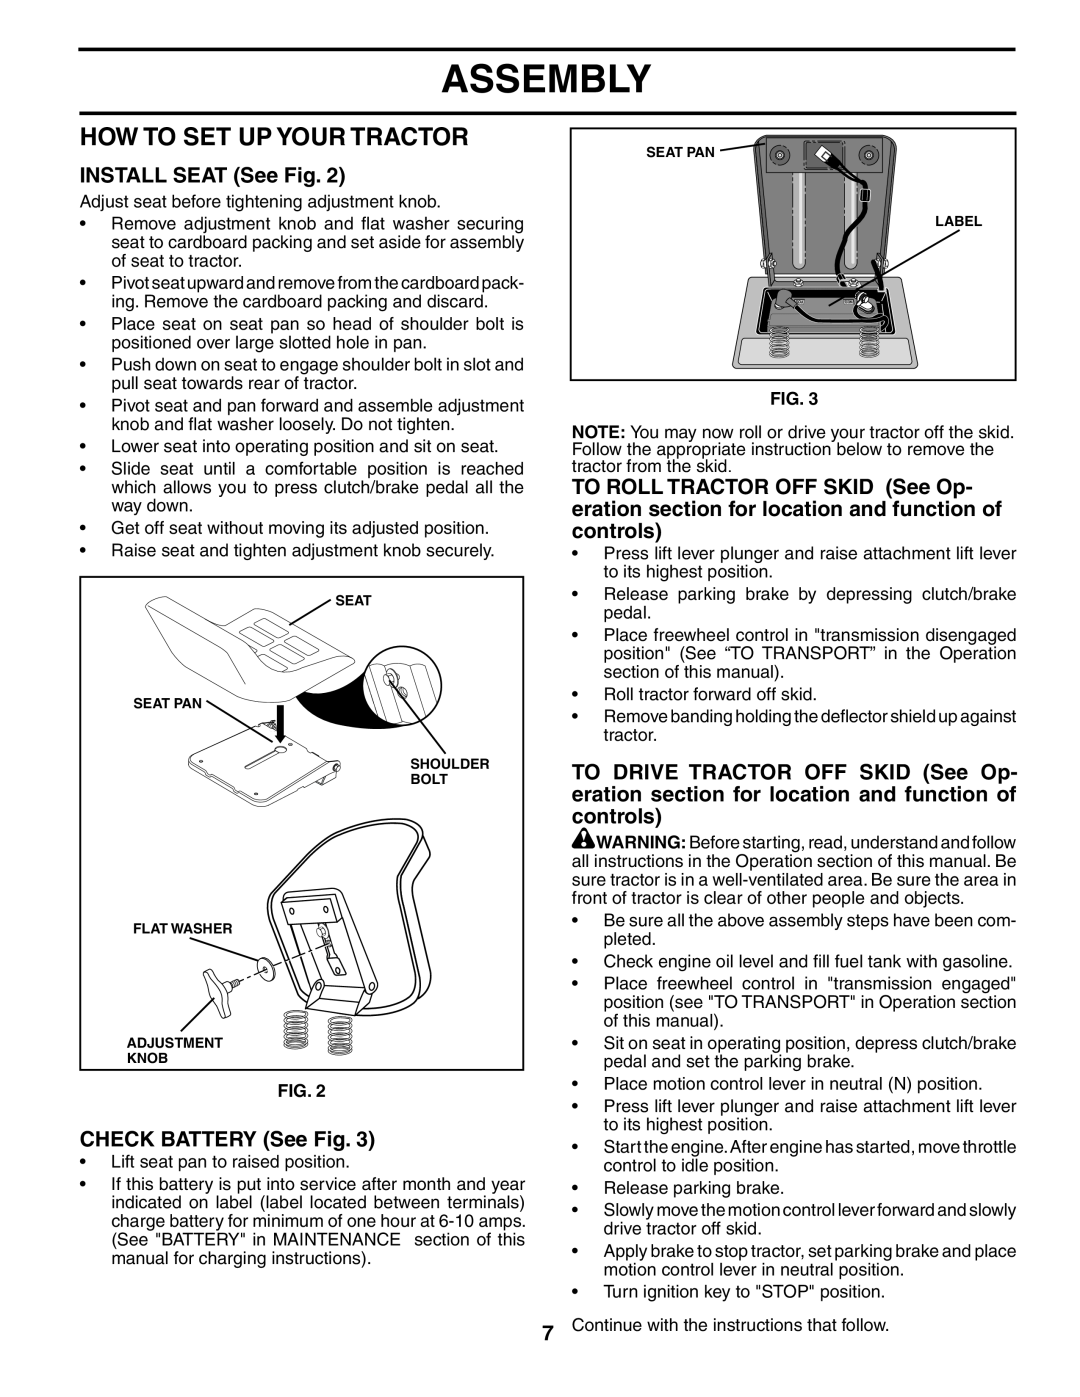 Husqvarna YTH1842 owner manual How To Set Up Your Tractor, INSTALL SEAT See Fig, CHECK BATTERY See Fig, Assembly 